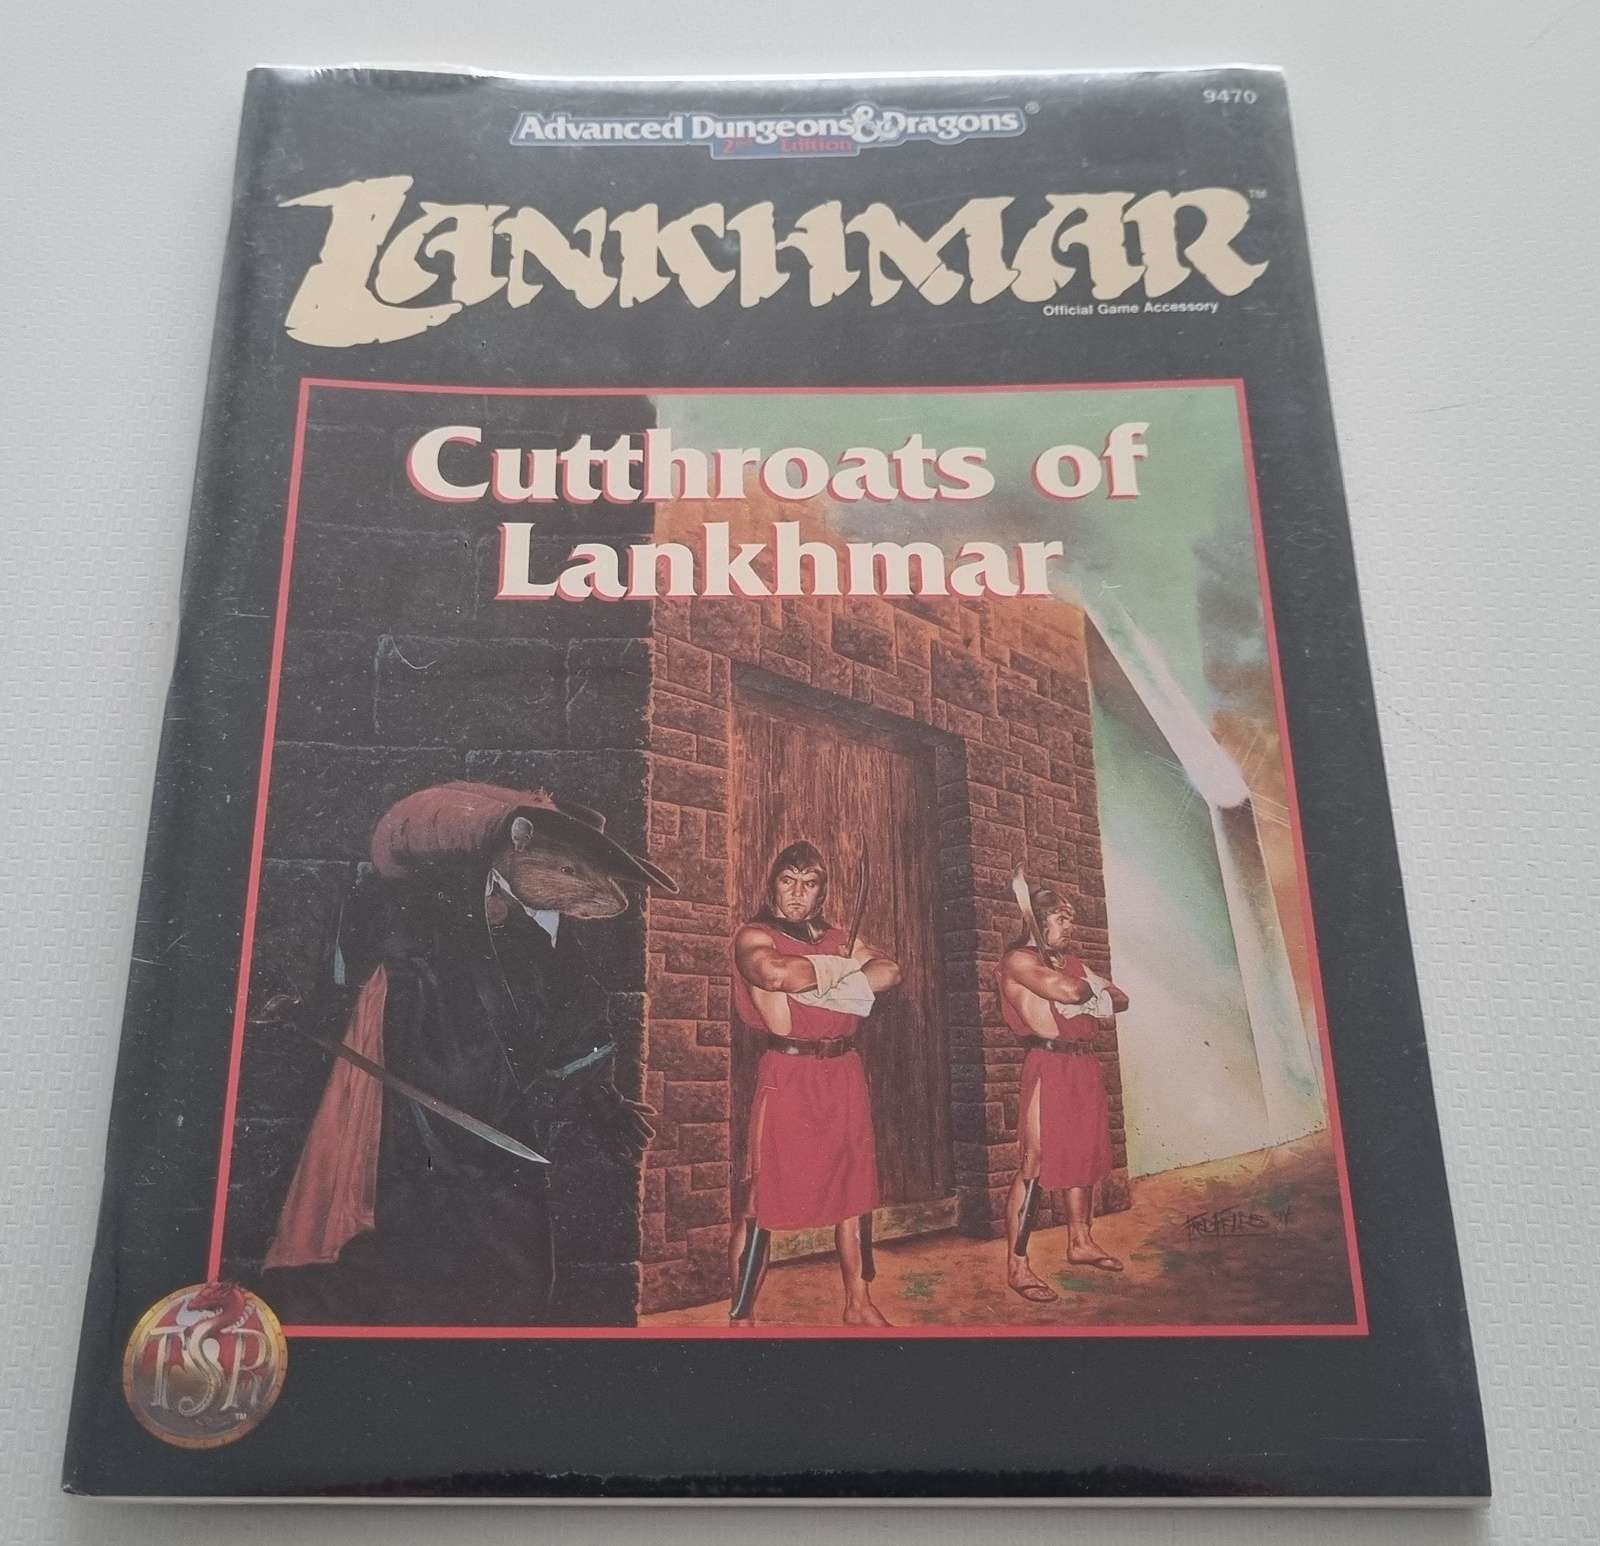 Advanced Dungeons & Dragons Module - Cutthroats of Lankhmar Sealed